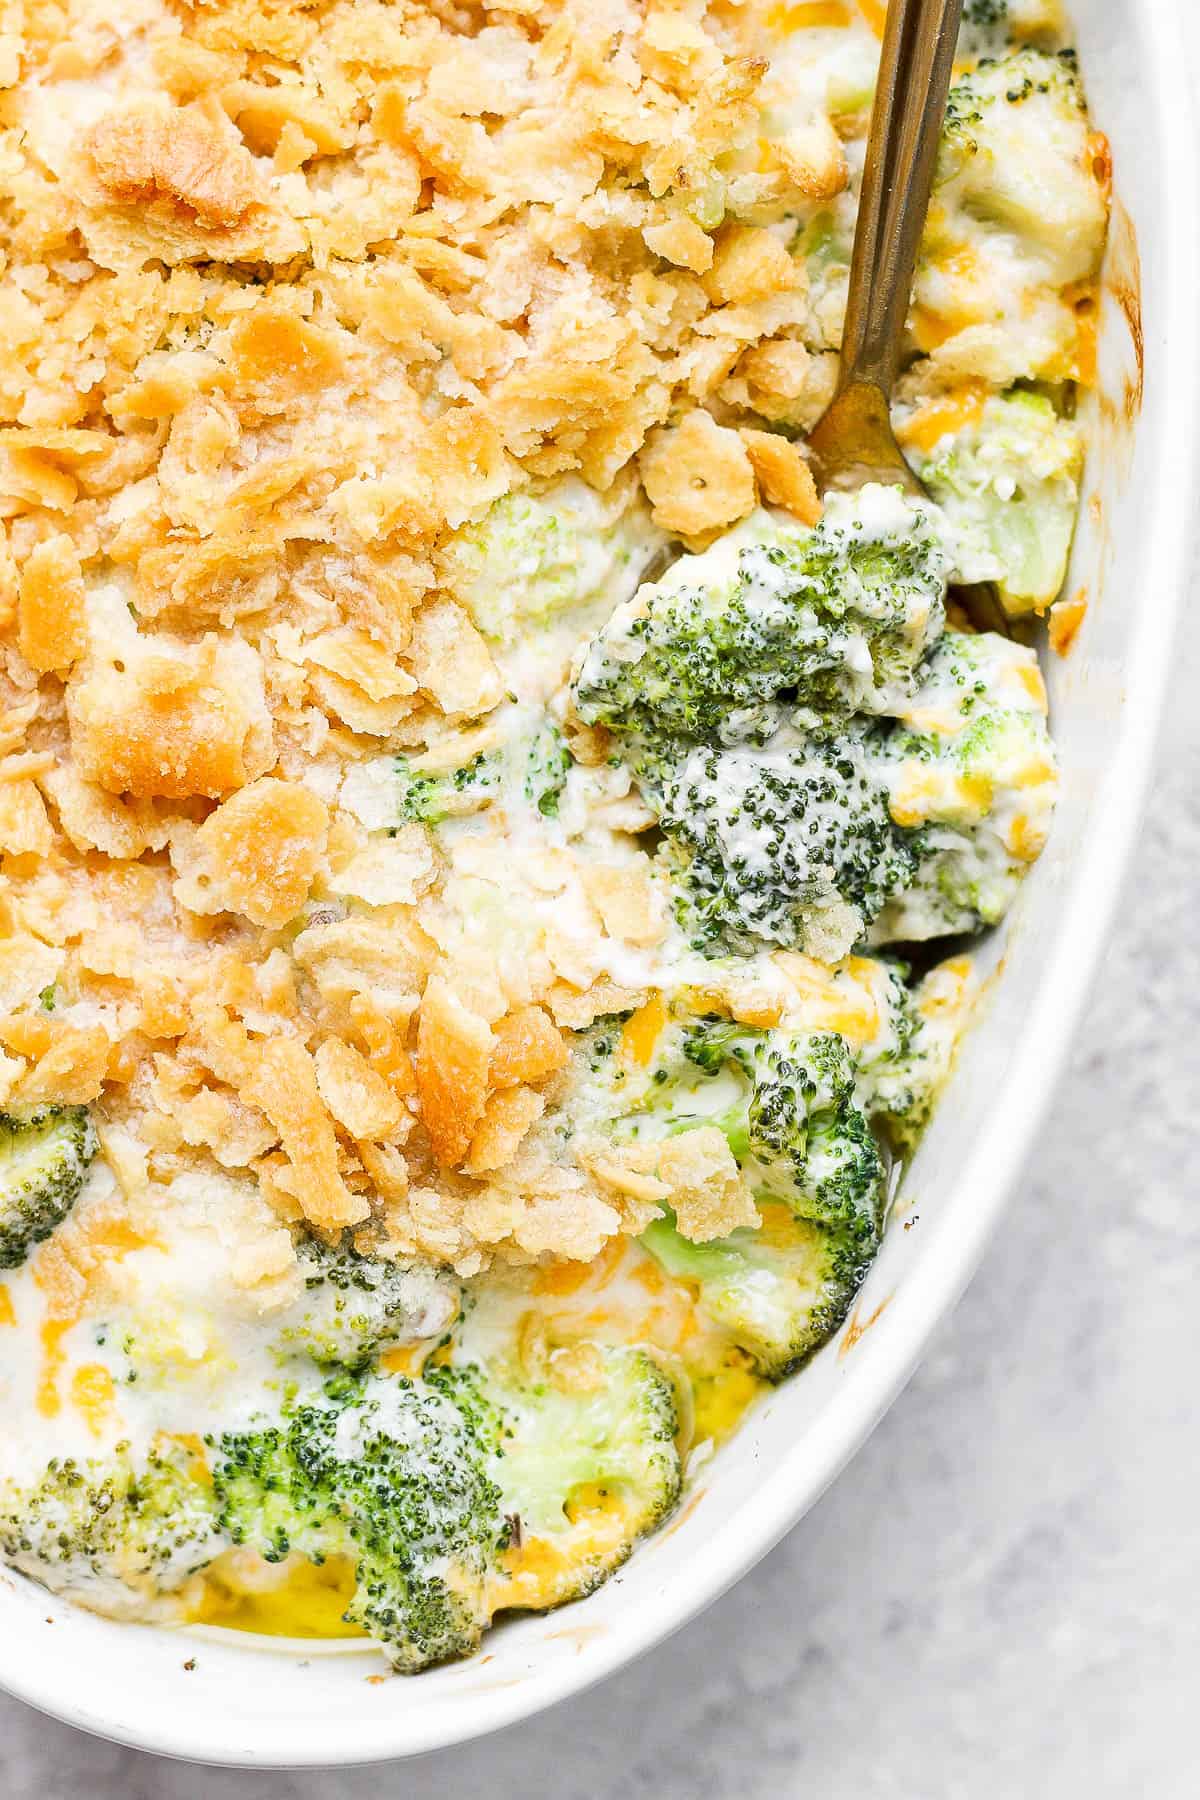 A close up image of the baked broccoli casserole with a spoon pulling out a small section to show a piece of broccoli coated in the cream mixture. 